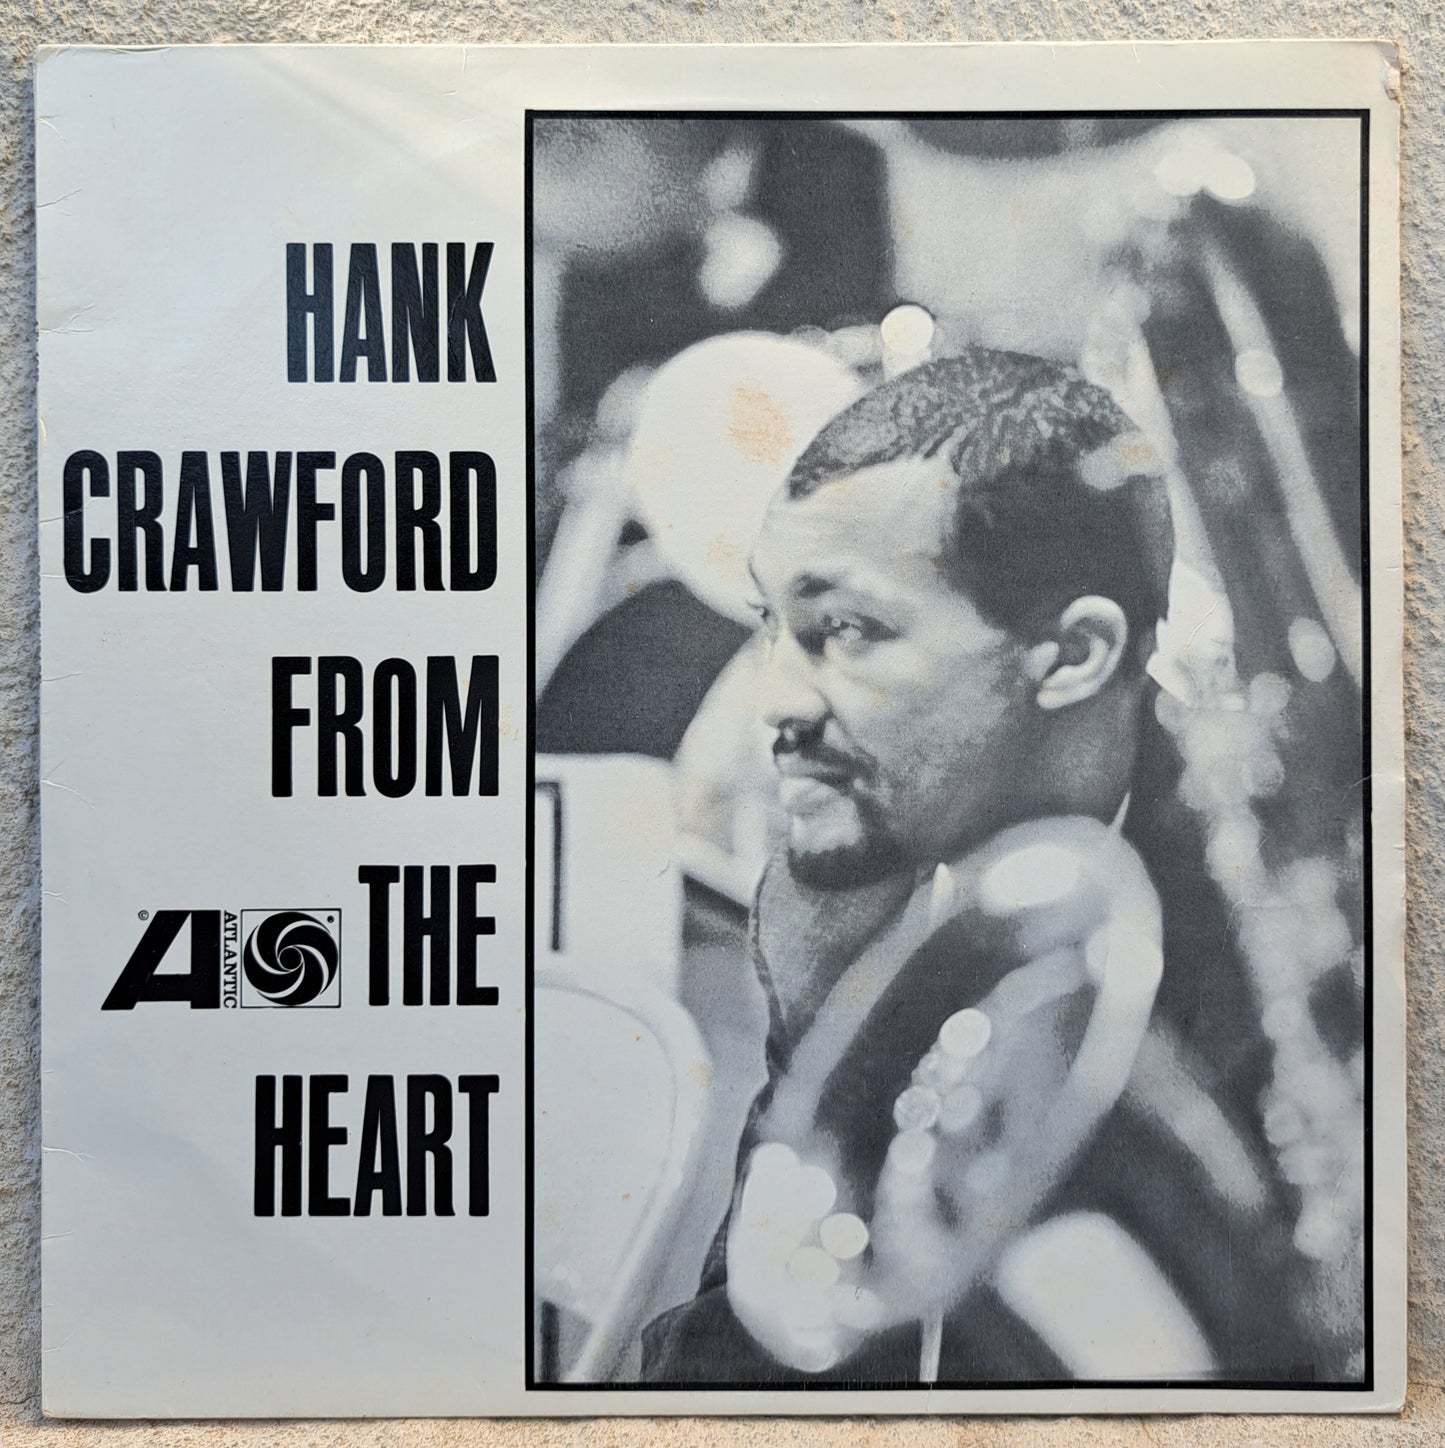 Hank Crawford - From the heart